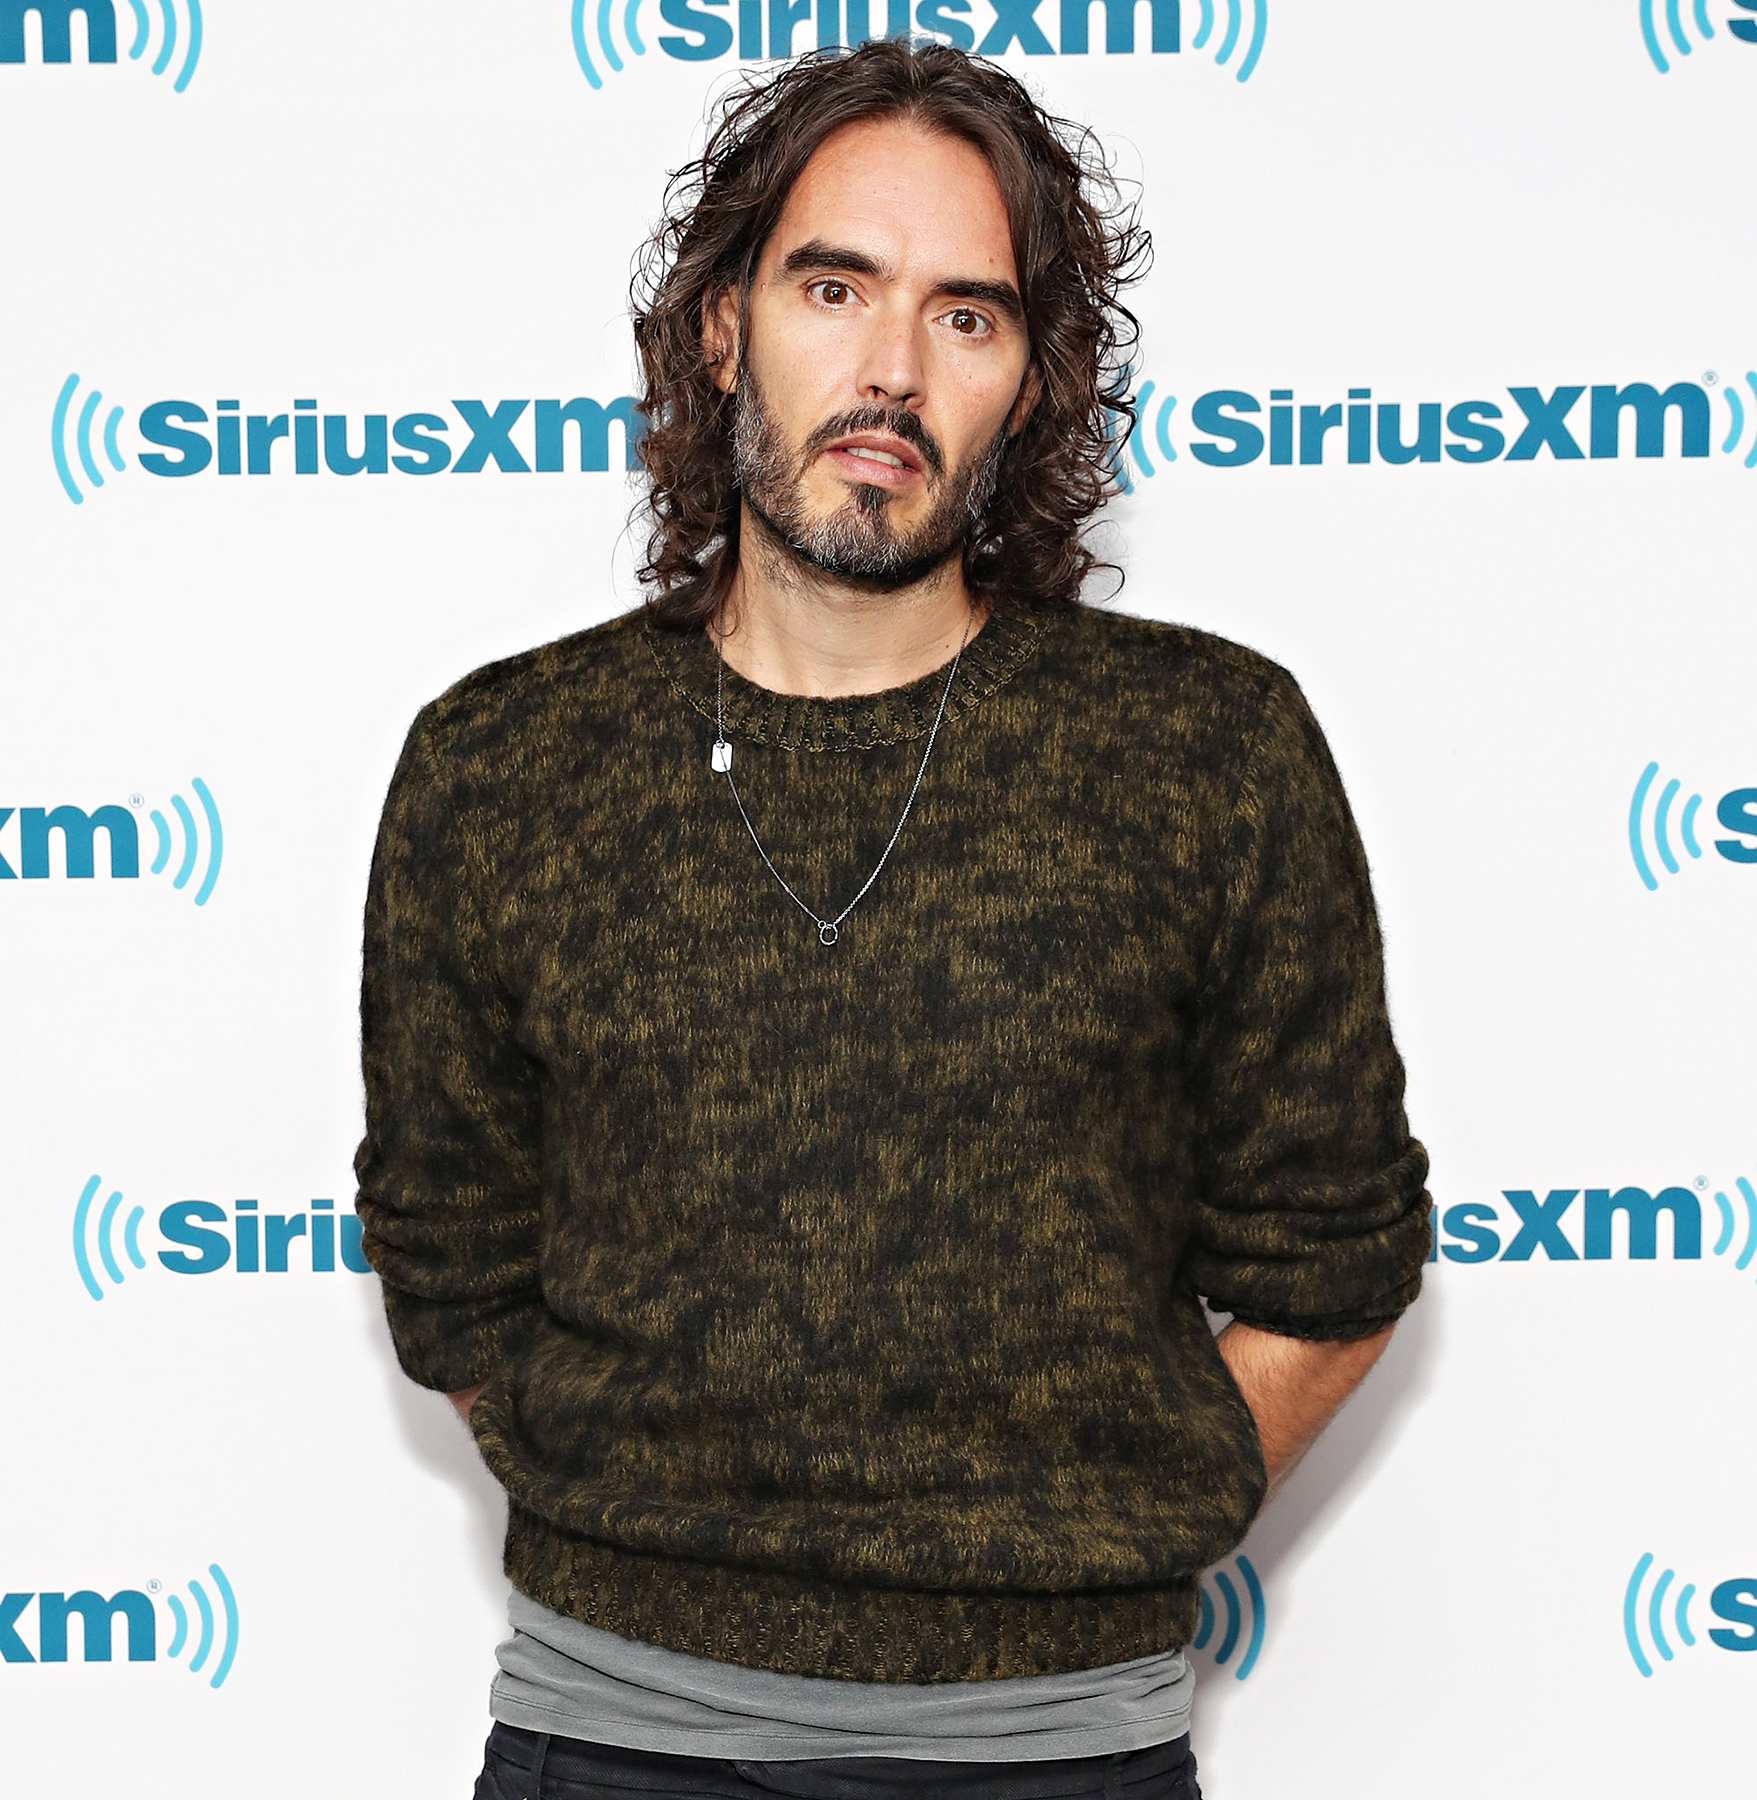 Russell Brand on Heroin, Sex Addiction and Katy Perry